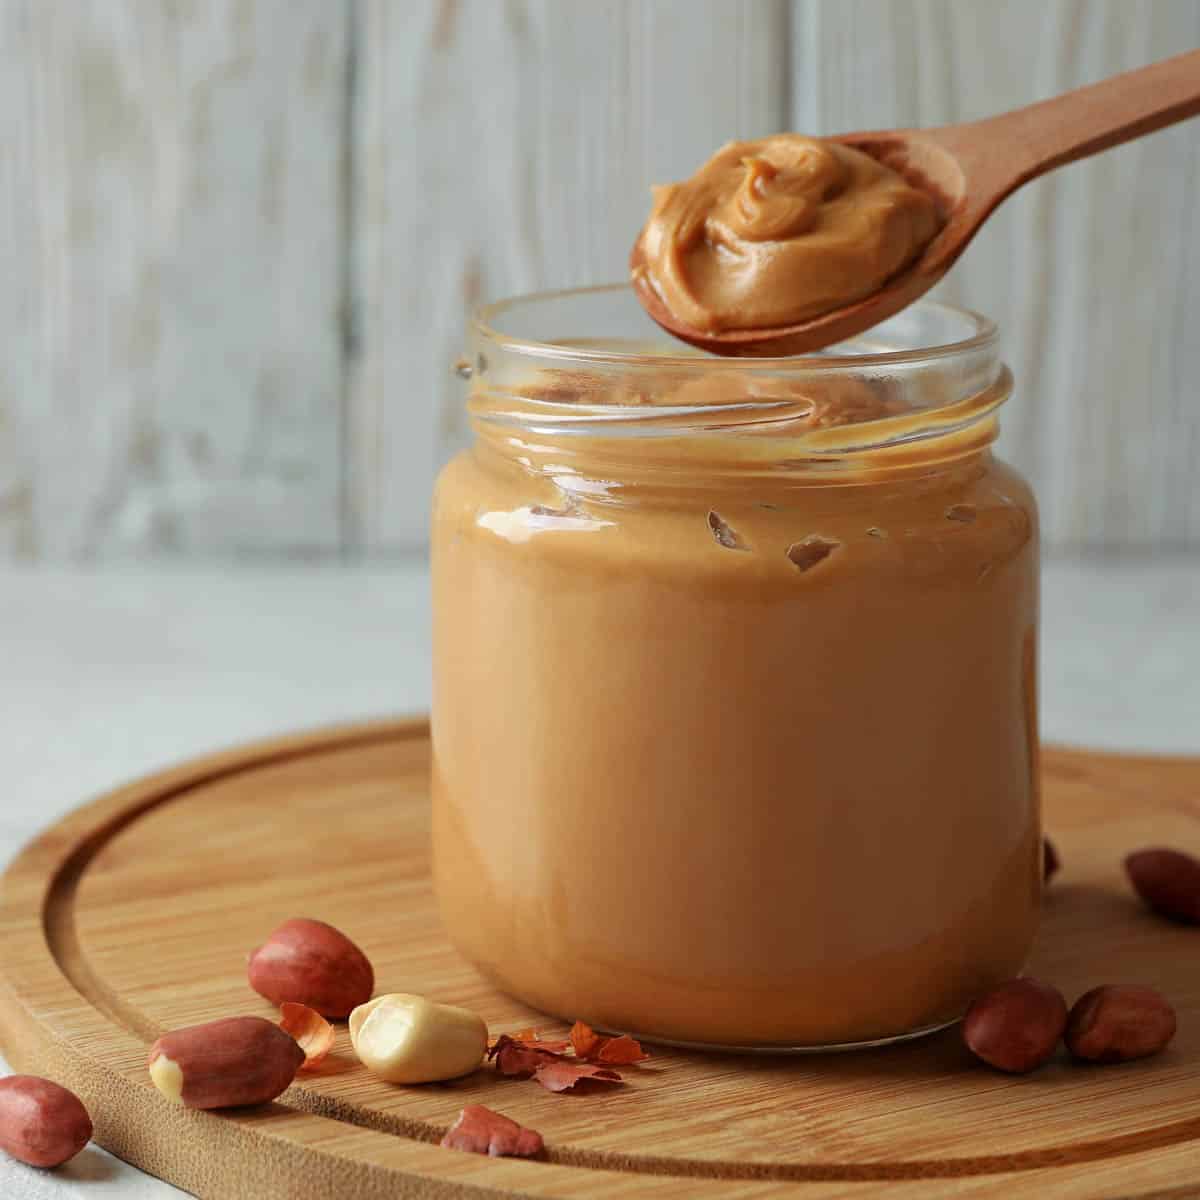 Jar of peanut butter on a round cutting board with a few peanuts on the board.